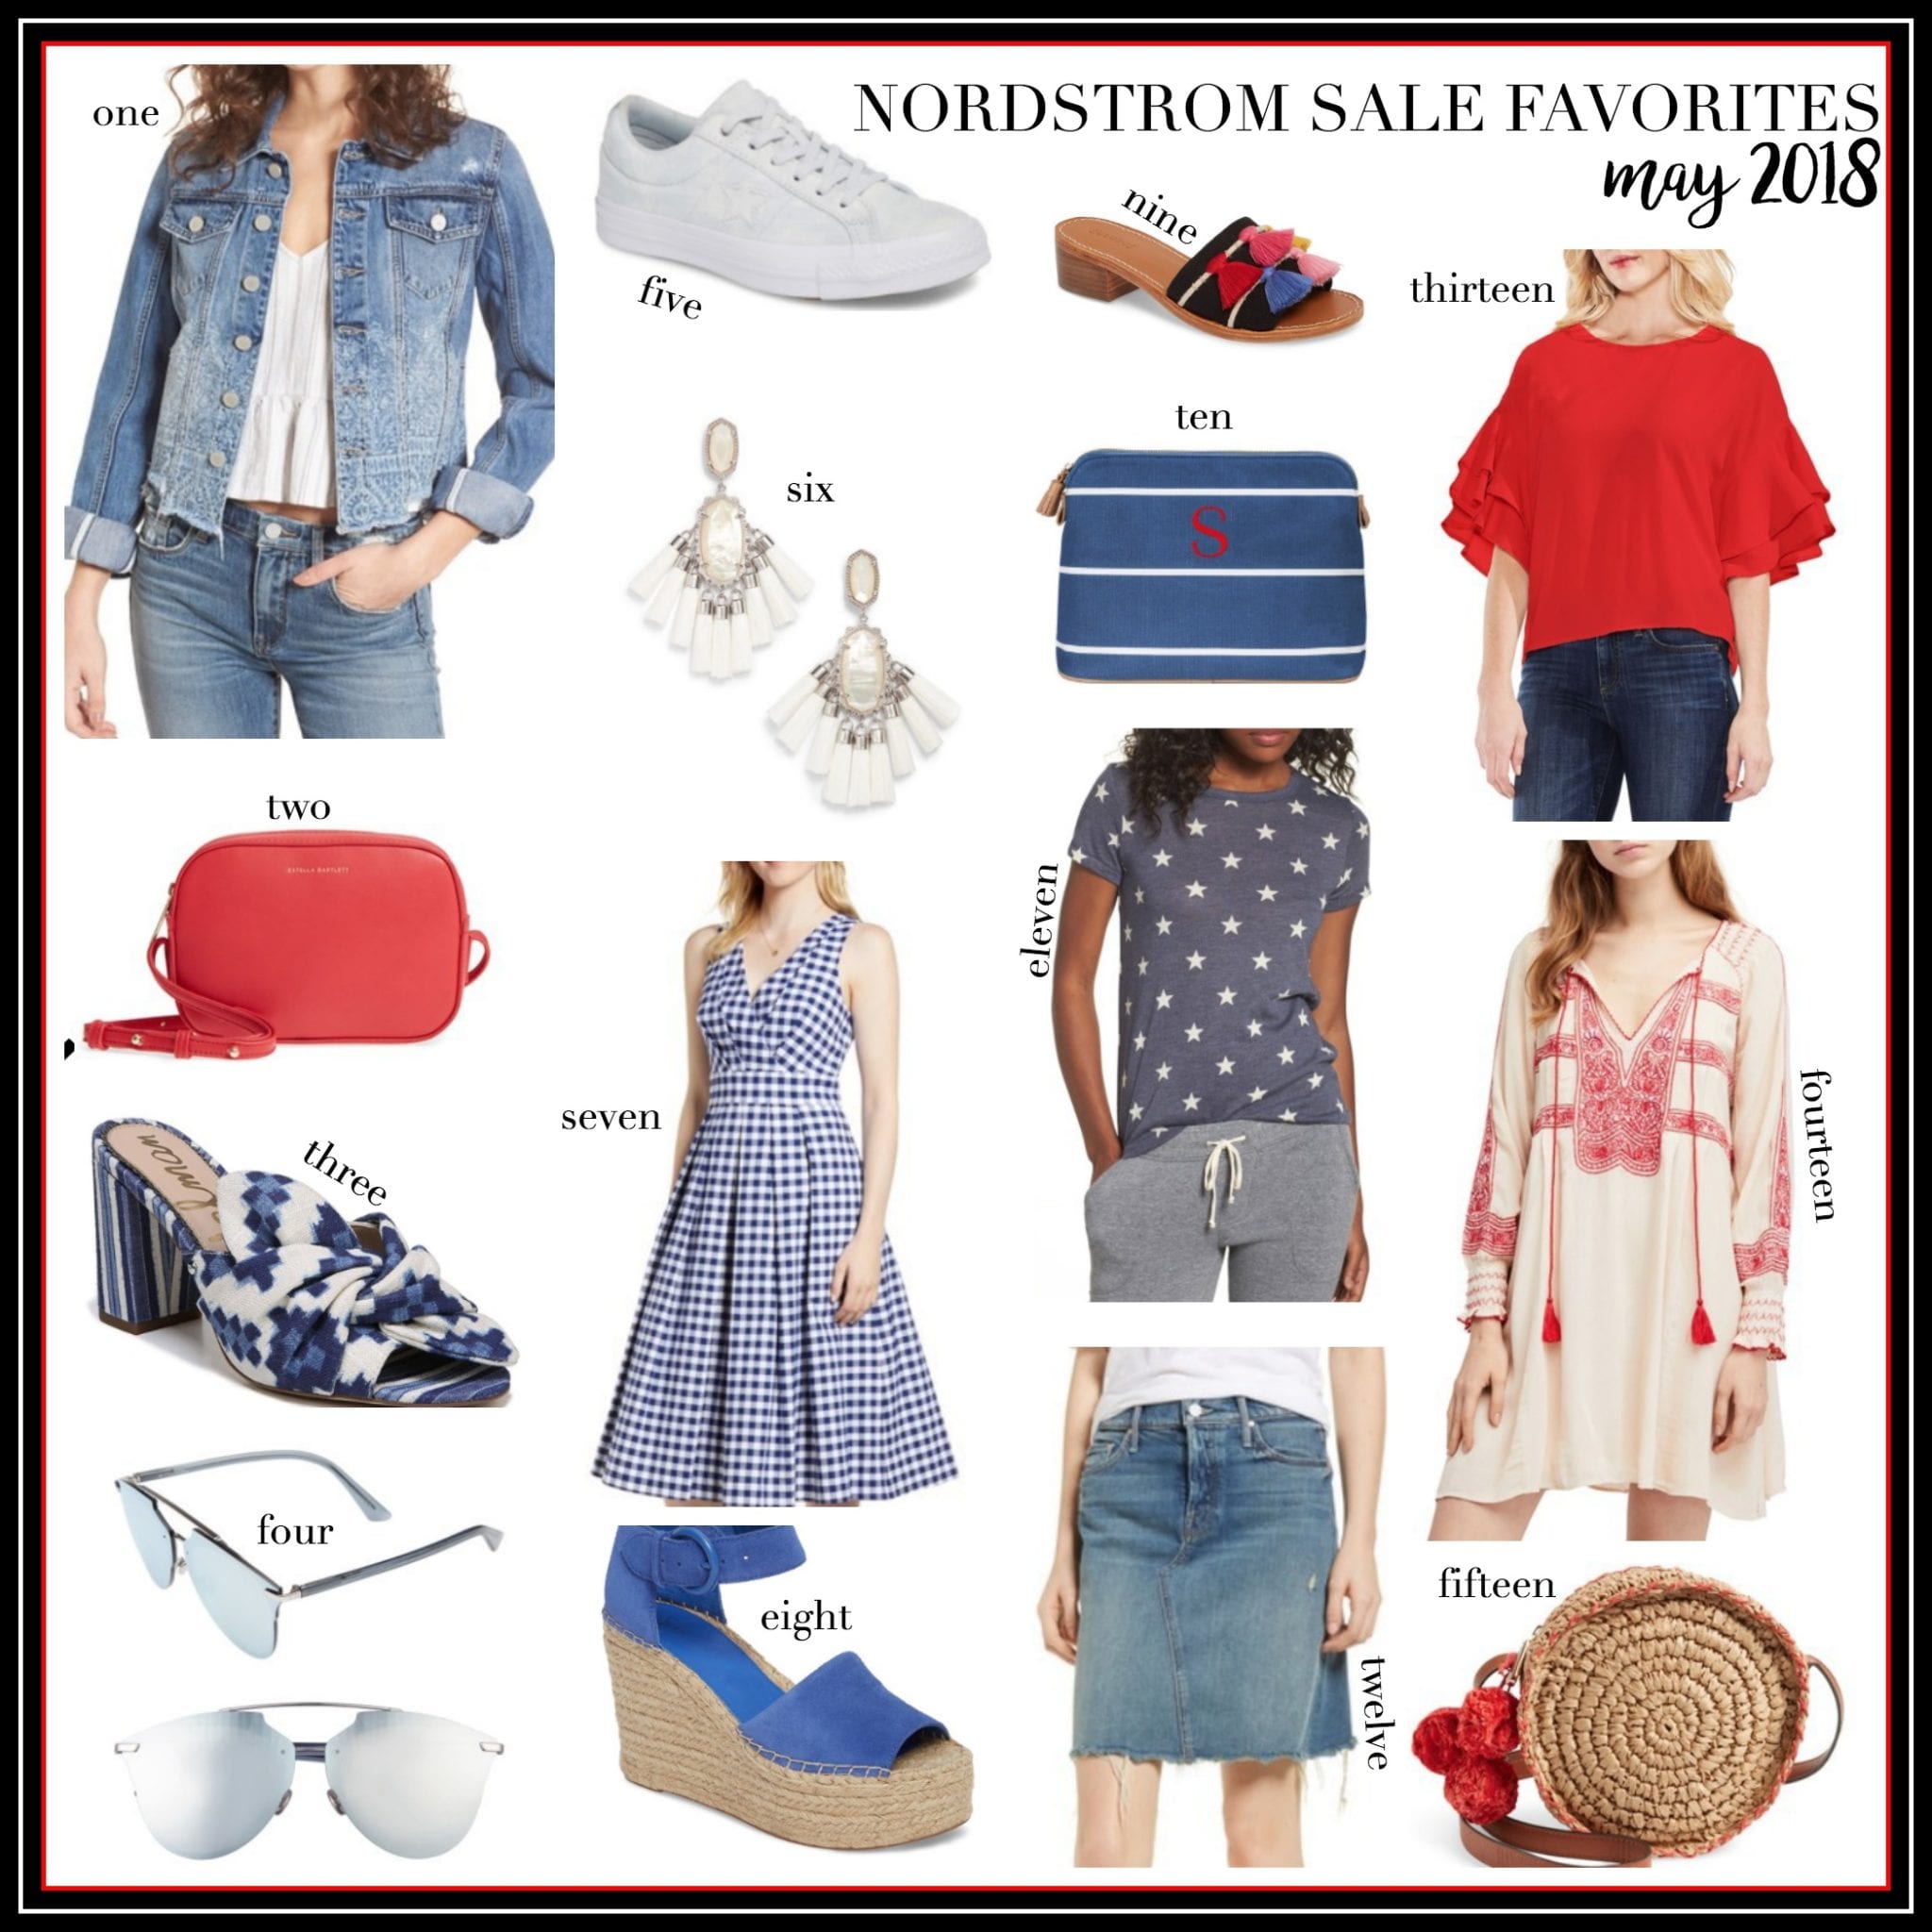 Memorial Weekend Sales | Wear Your Red, White & Blue - SheShe Show